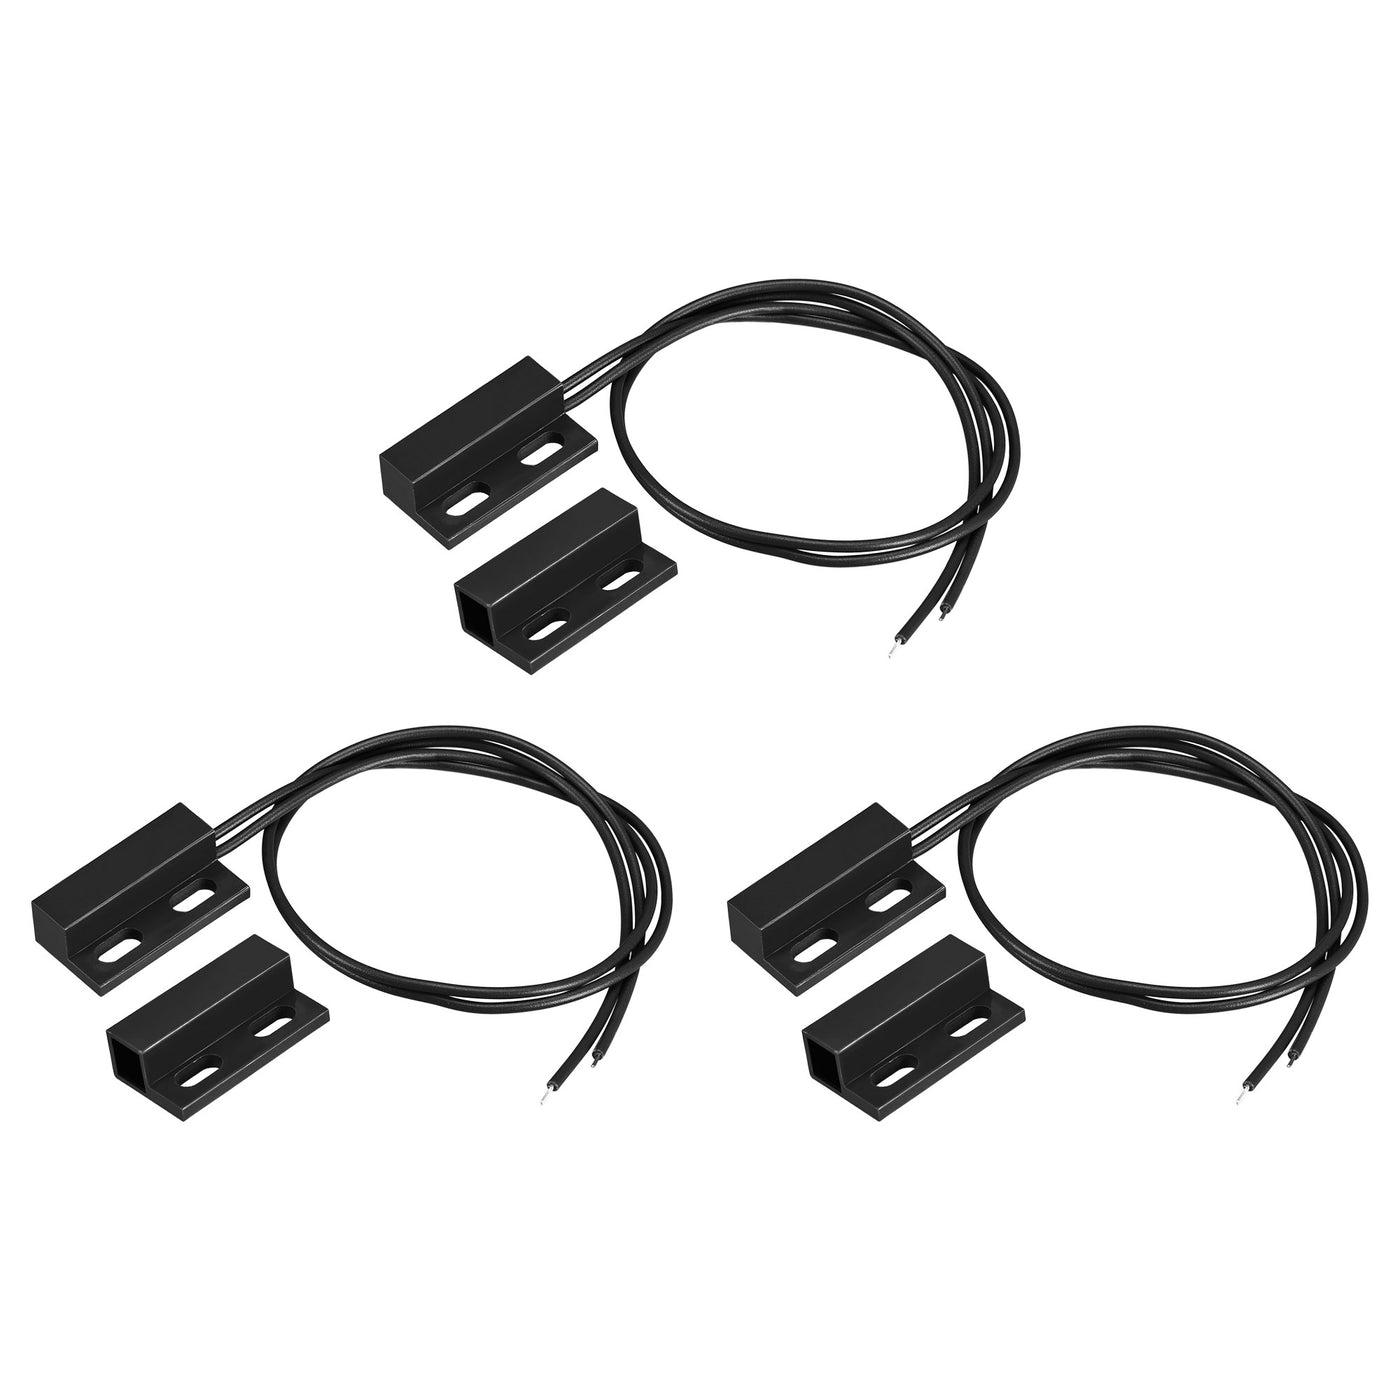 uxcell Uxcell Wired Door Contact Sensor NC Surface Mount Magnetic Reed Switch Black 3 Pcs